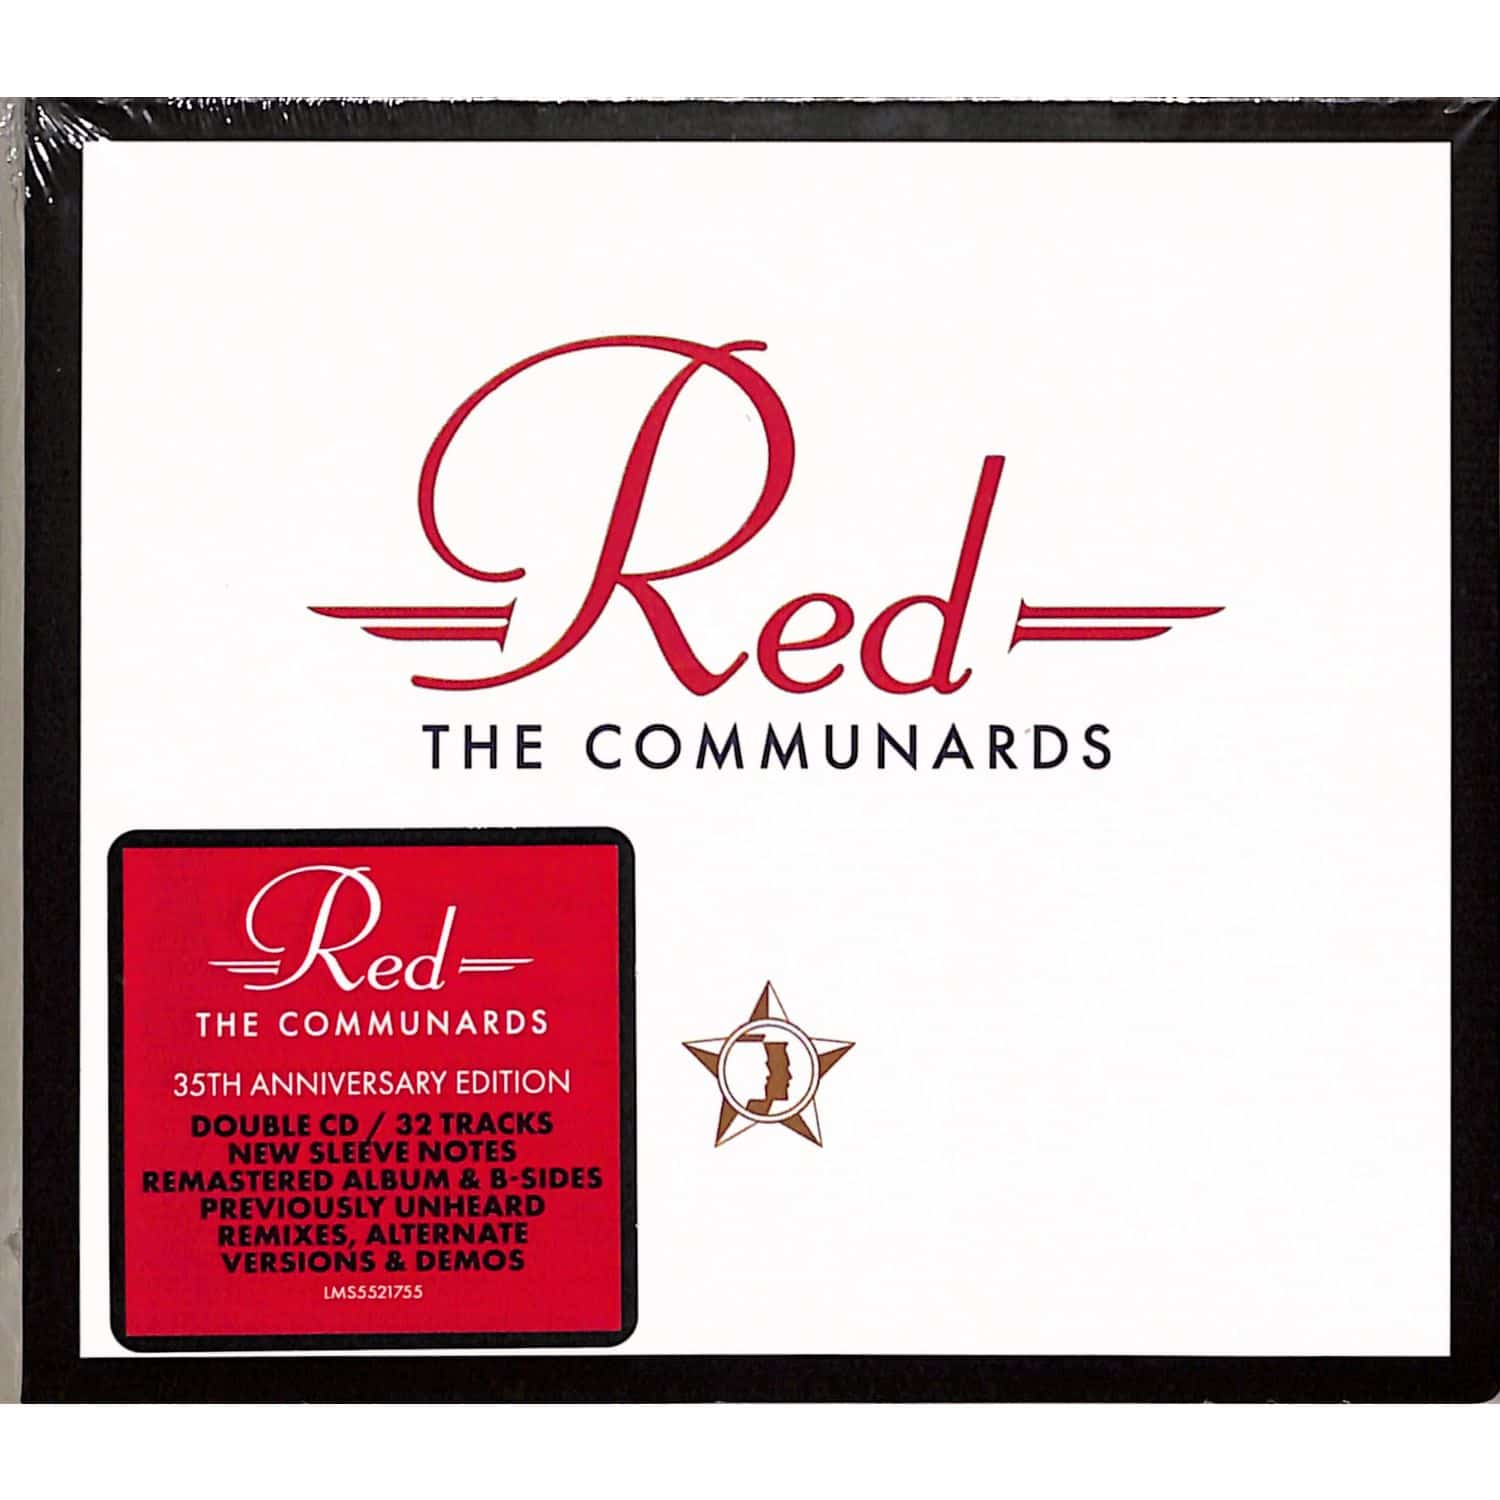 The Communards - RED 